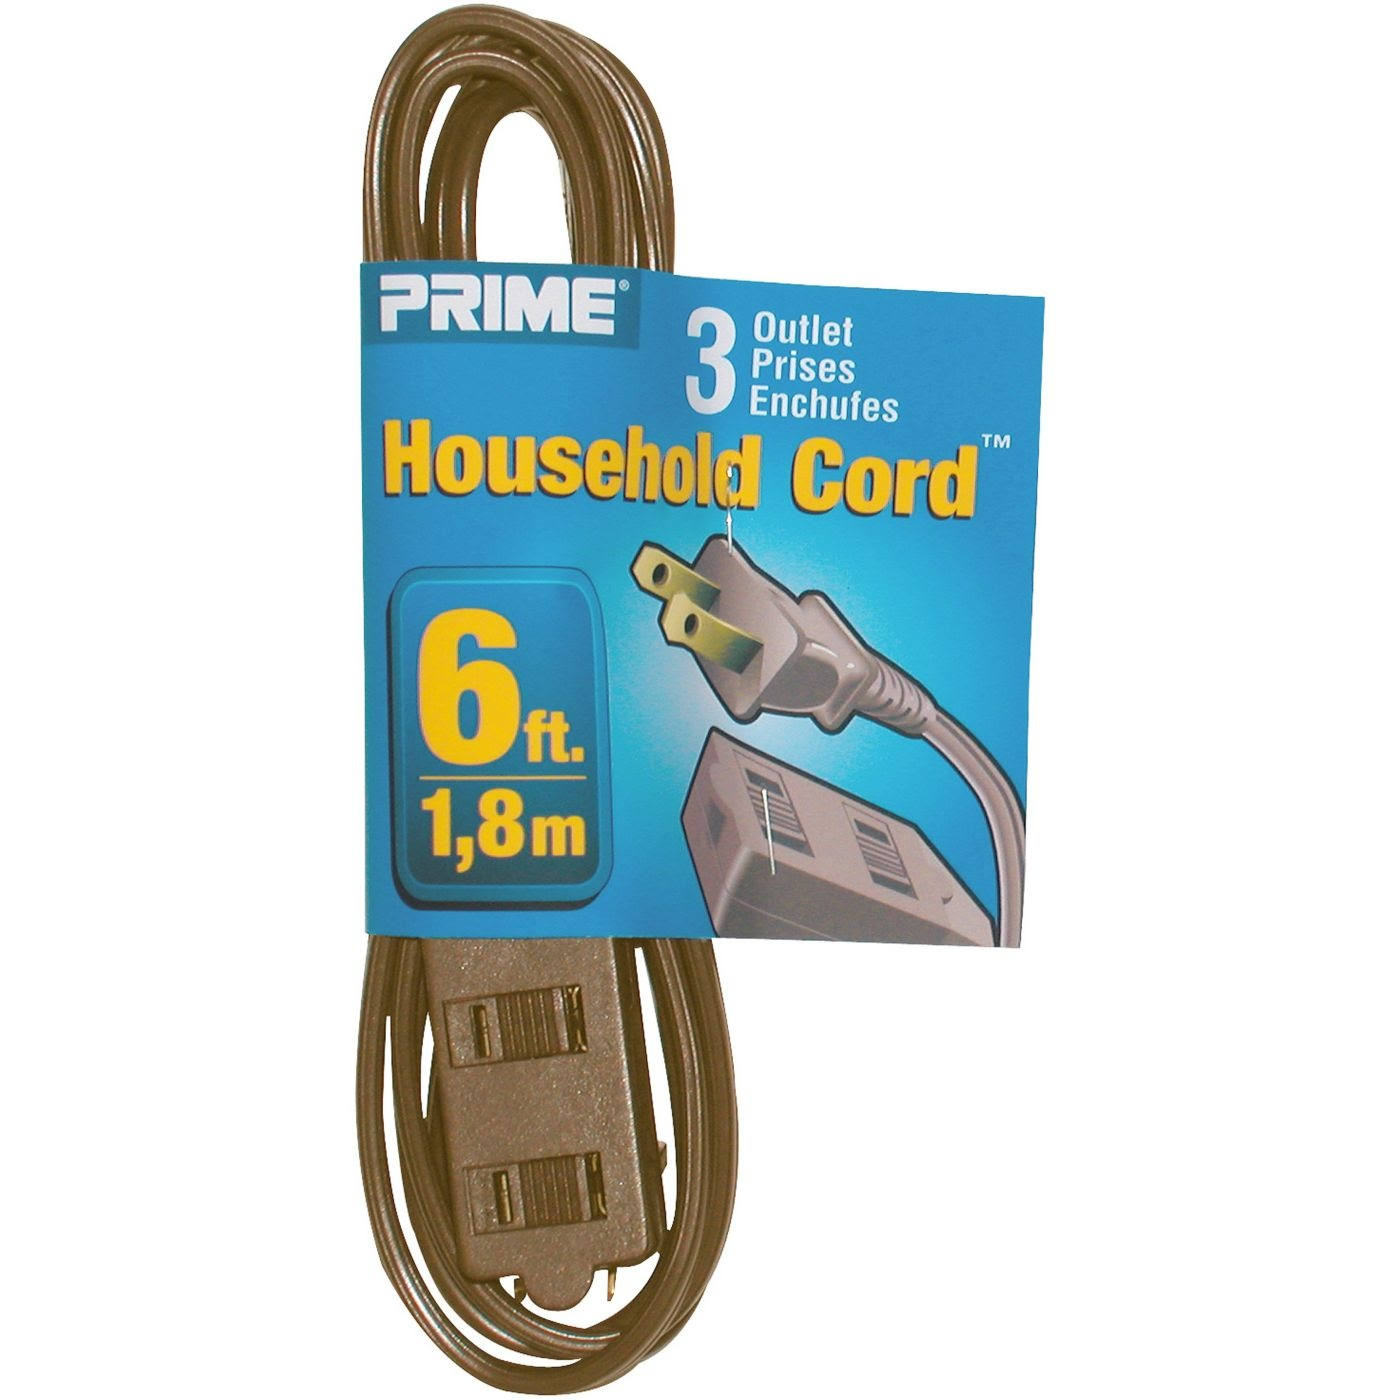 Prime Wire and Cable Indoor Cord - Brown, 6', 3 outlets